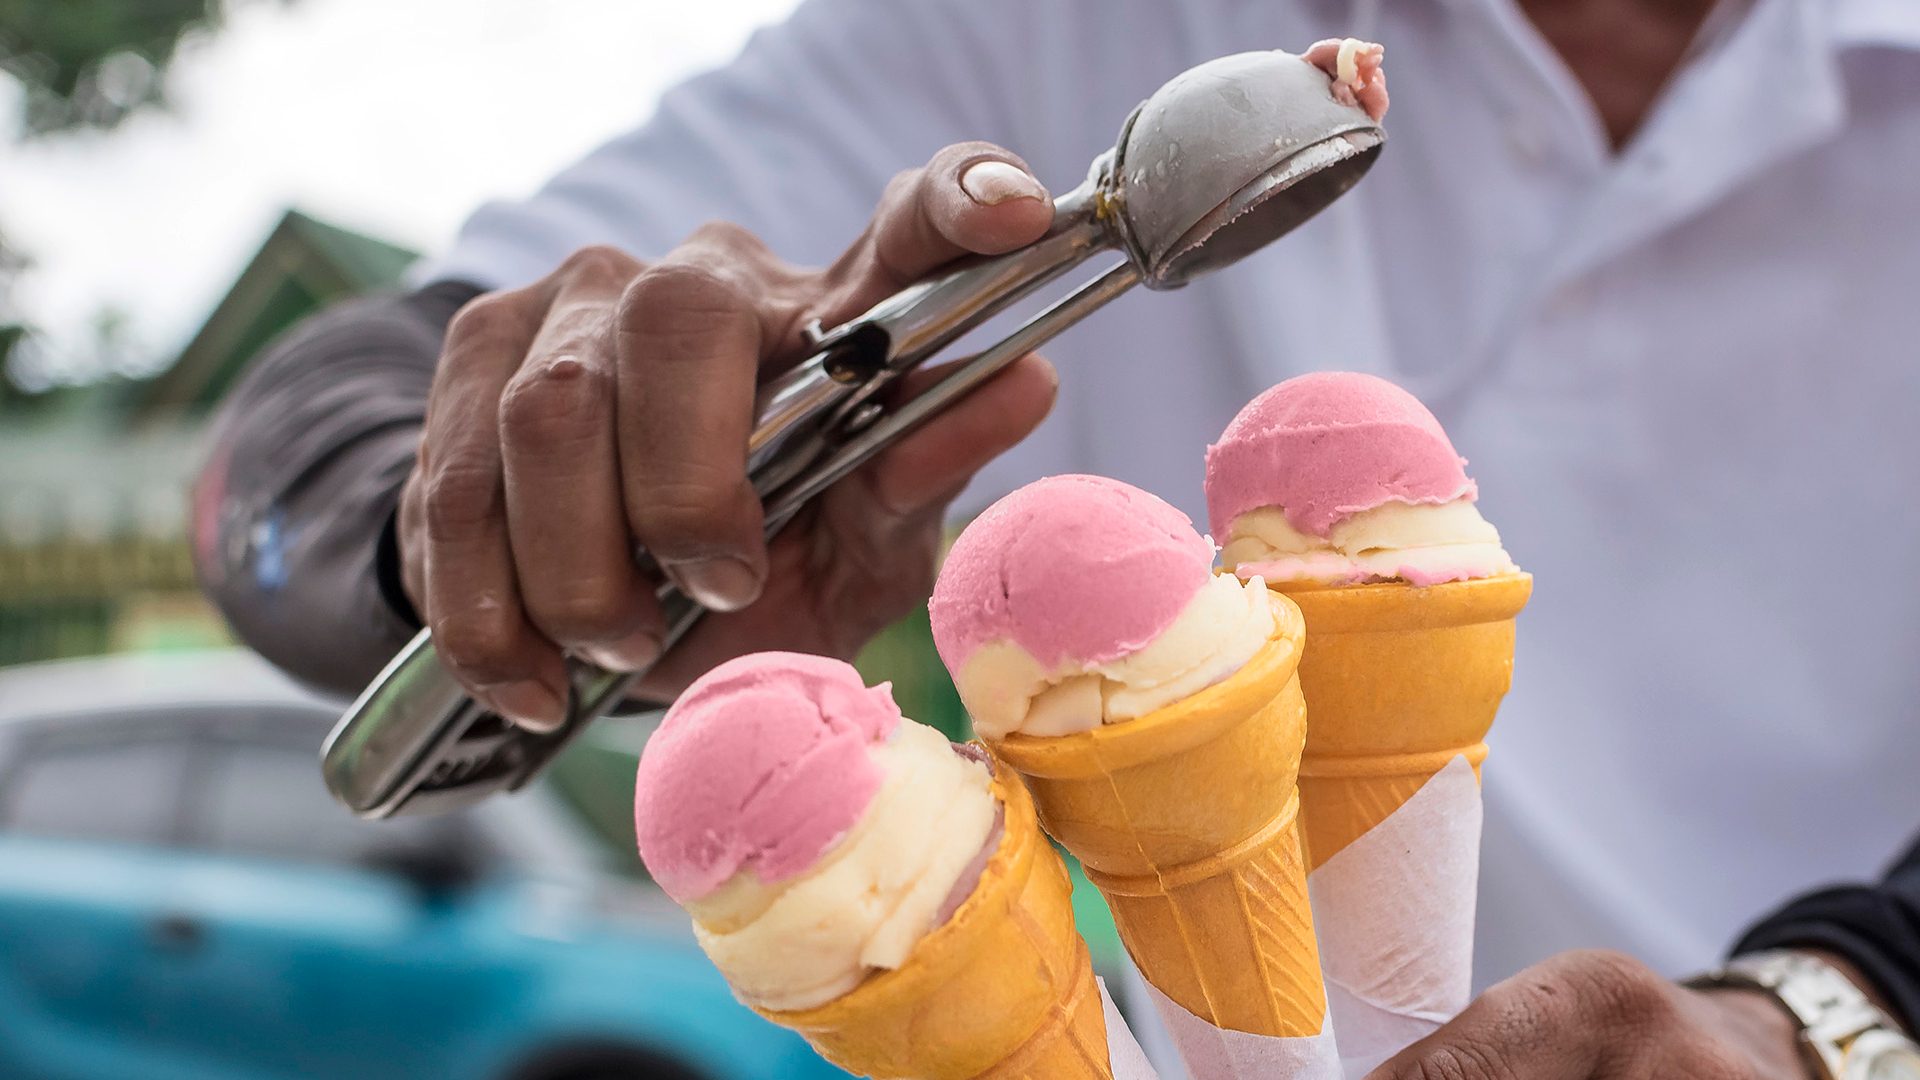 Sinigang sorbetes, anyone? These are the Filipino flavors people want to see as ice cream